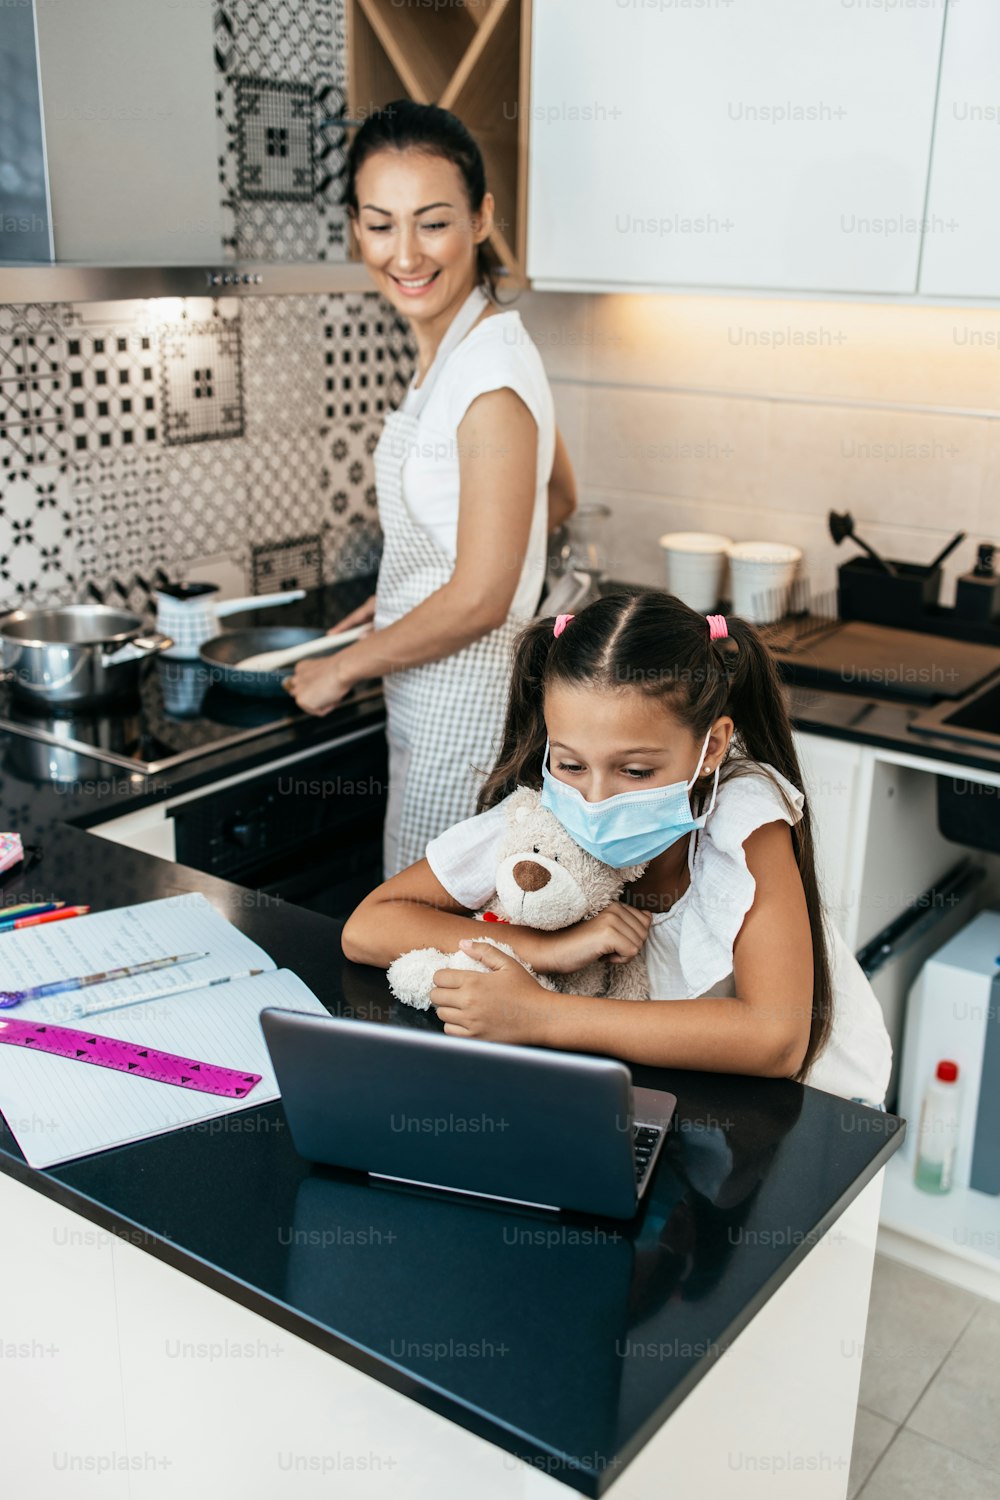 Young little girl having e-learning session during Covid-19 pandemic crisis lockdown or quarantine. Busy mother working in kitchen and preparing lunch in the background. Illness prevention and new normal concept.